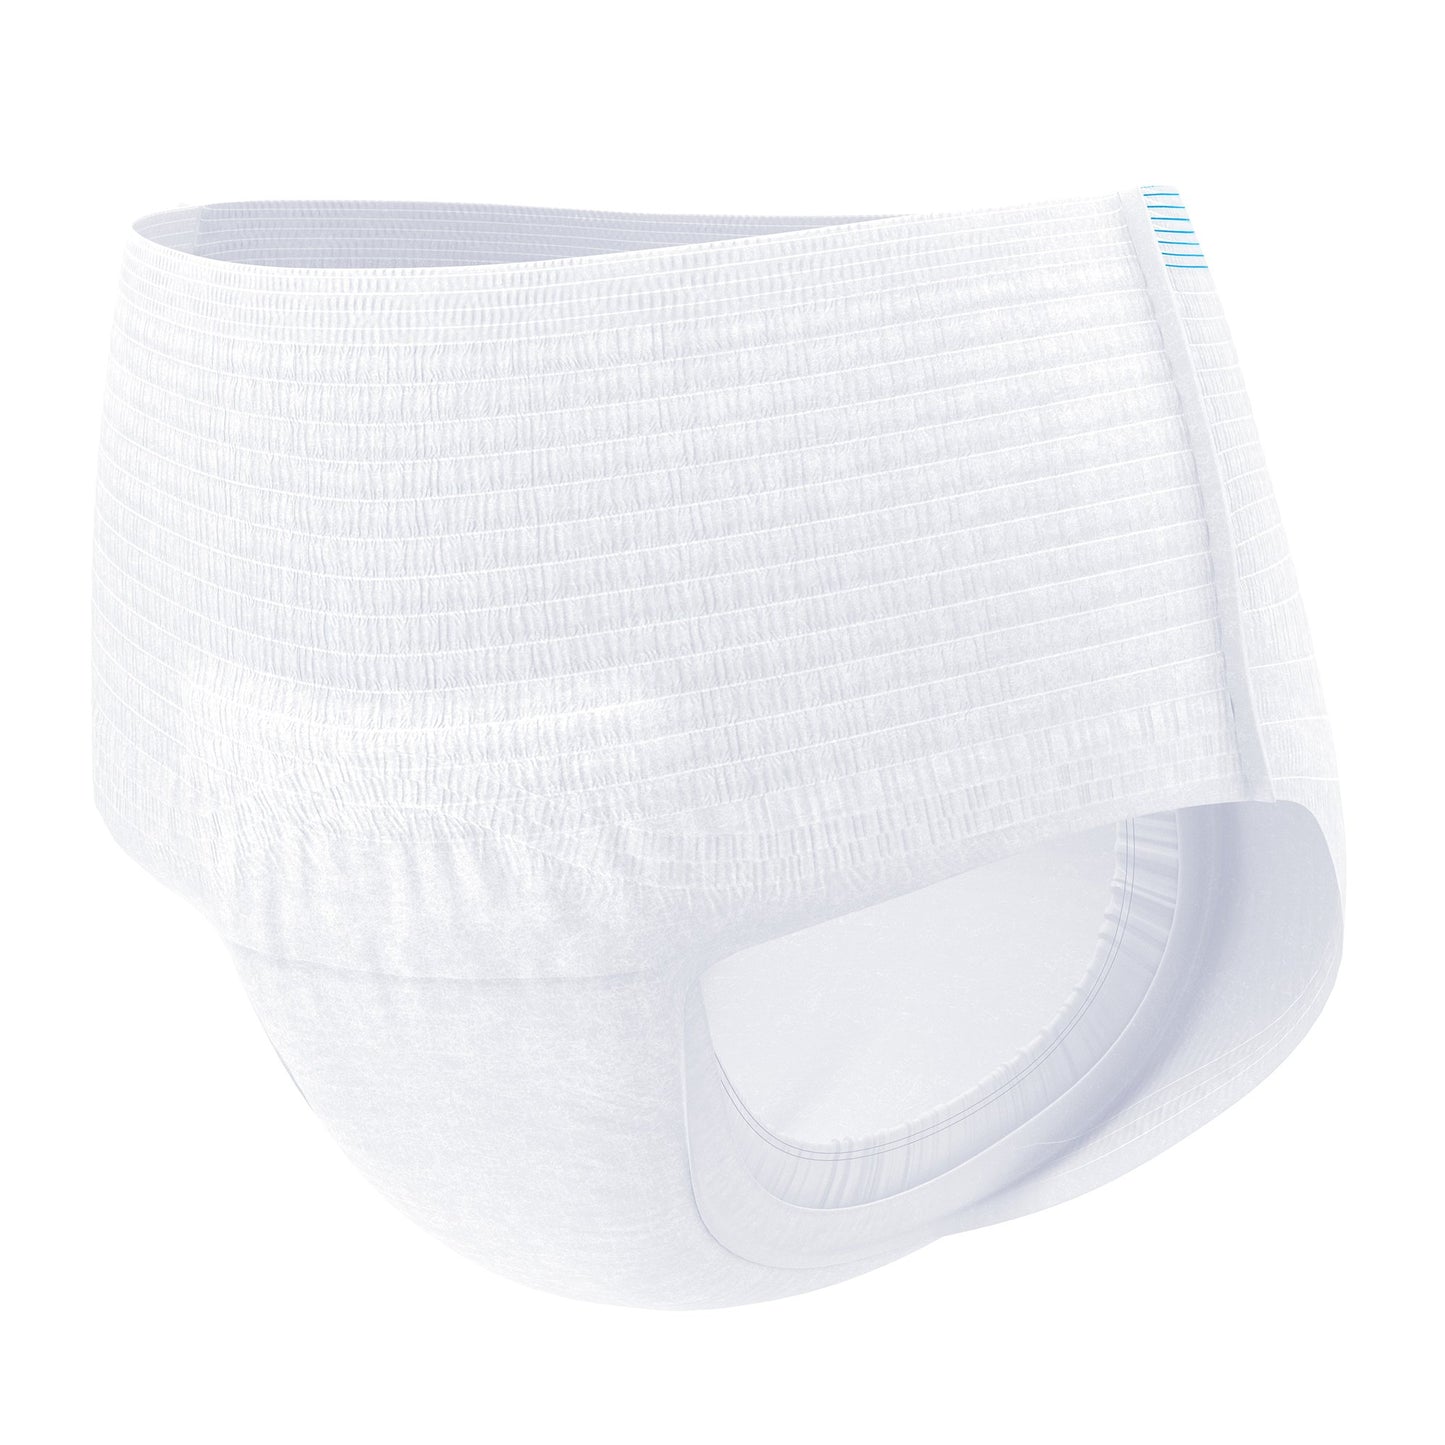 TENA® ProSkin™ Plus Fully Breathable Absorbent Underwear, X-Large, 14 ct